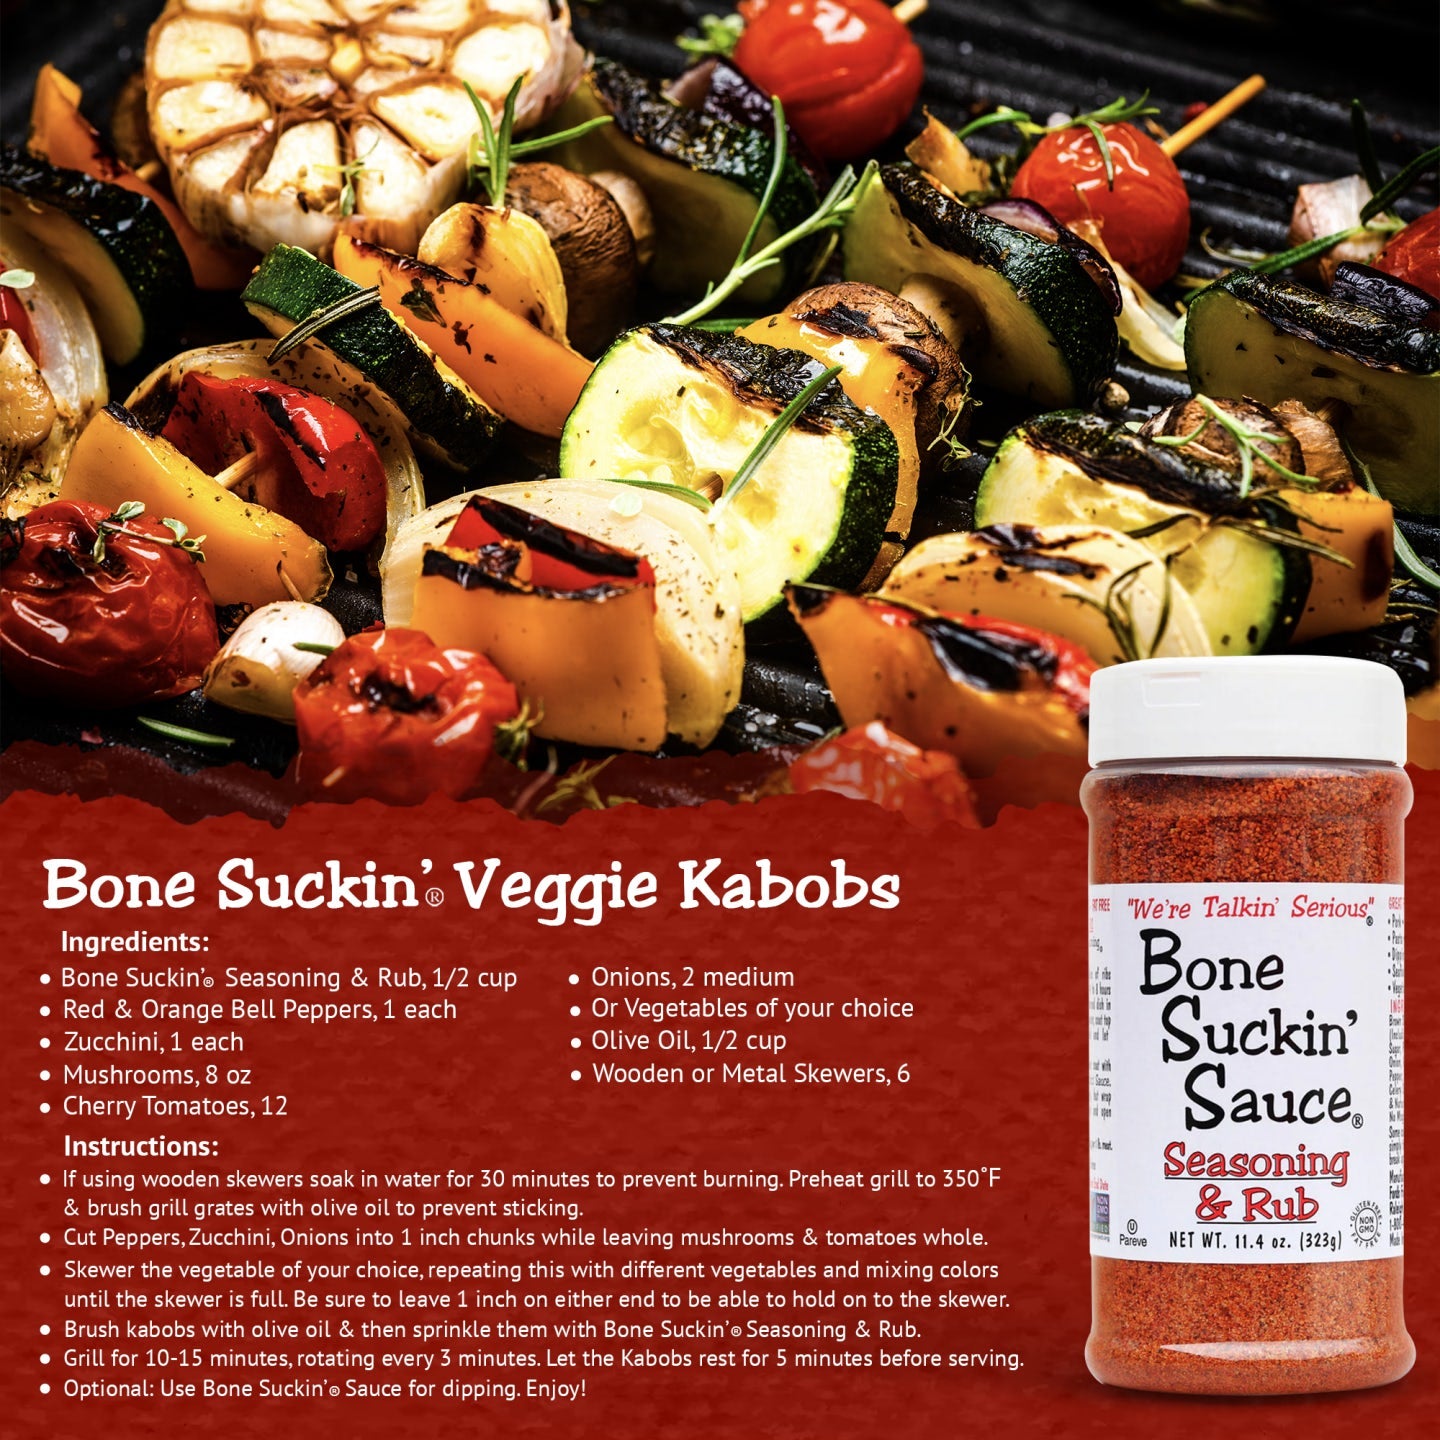 Bone Suckin' Seasoning & Rub Grilled Veggie Kabobs Recipe. Ingredients: Bone Suckin' Seasoning & Rub, 1/2 cup. Veggies of your choice (bell peppers, onions, etc). 1/2 cup olive oil. 6 wooden/metal skewers. Instructions: If using wooden skewers, soak in water for 30 min. Preheat grill to 350. Brush grill grates with olive oil. Cut veggies into chunks as needed. Skewer any veggie until skewer is full. Brush kabobs with olive oil, sprinkle with Bone Suckin' Seasoning & Rub. Grill 10-15 minutes.